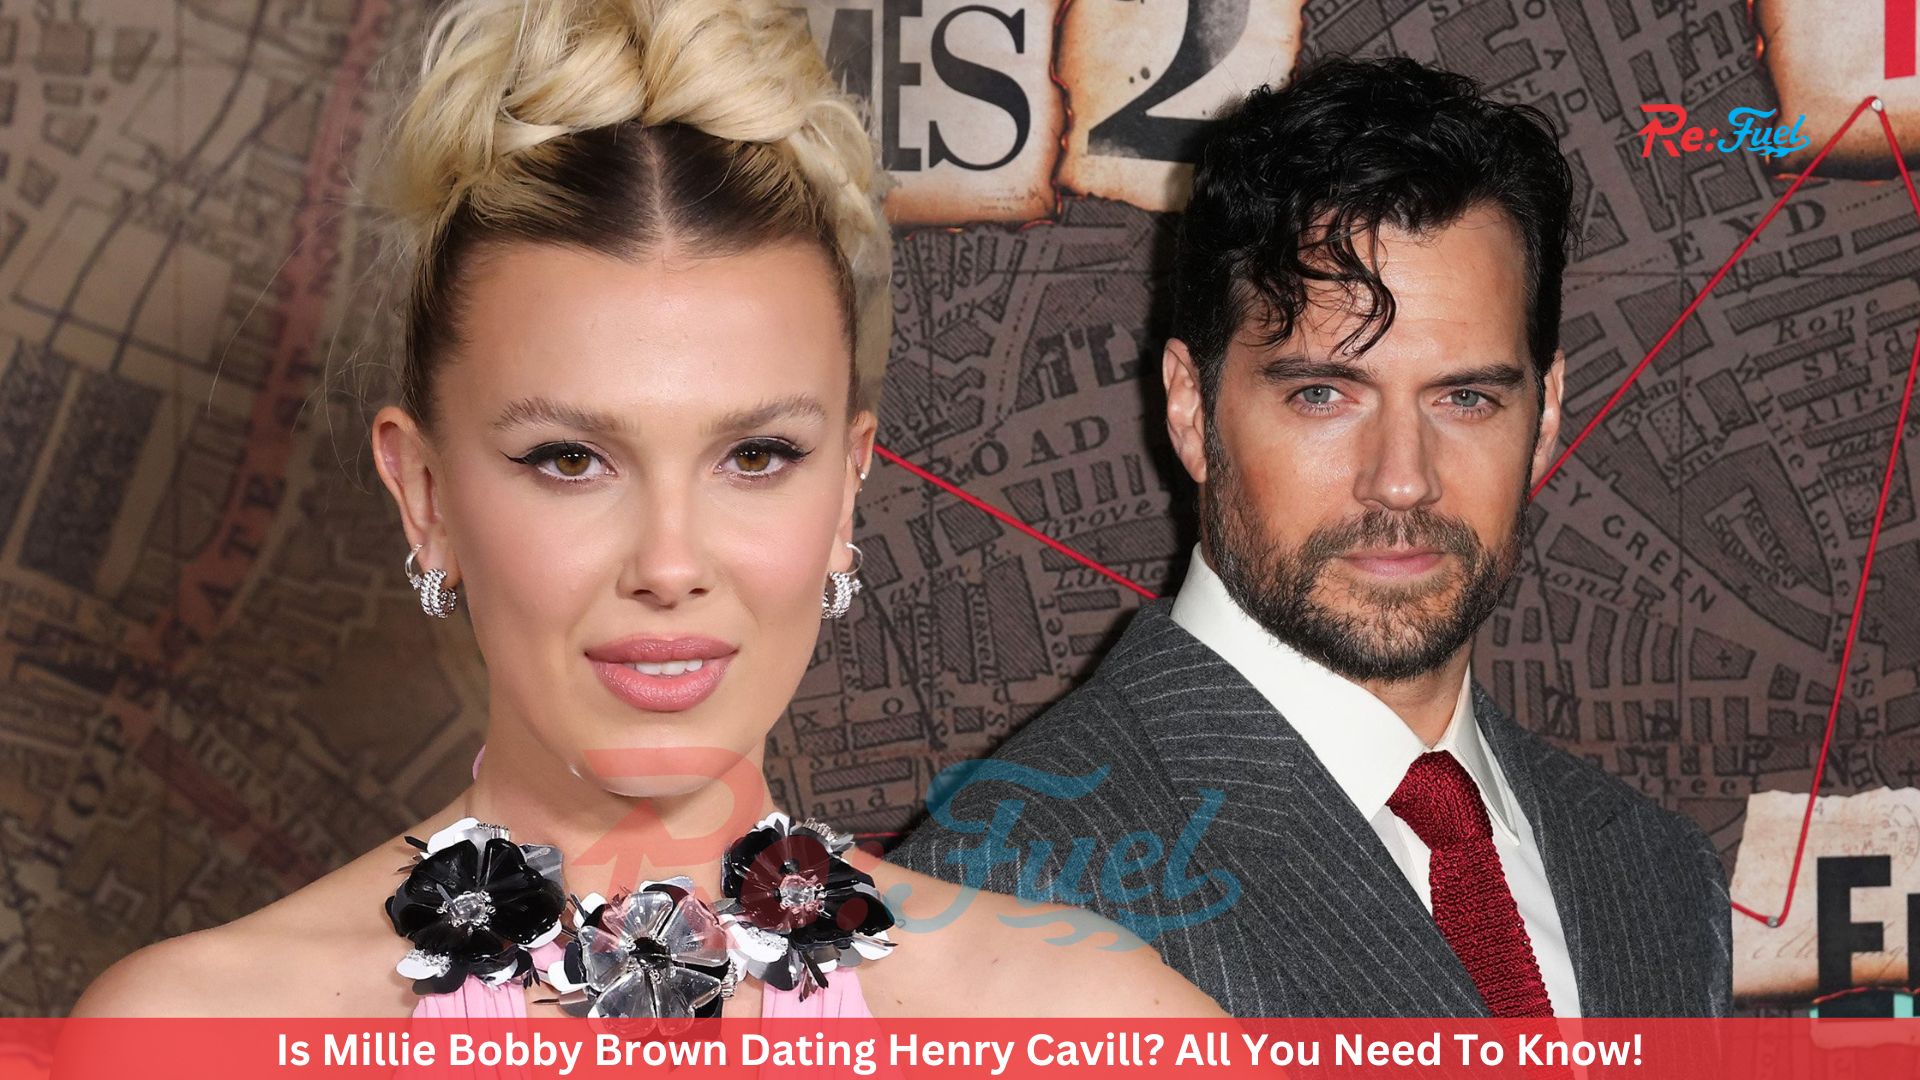 Is Millie Bobby Brown Dating Henry Cavill? All You Need To Know!